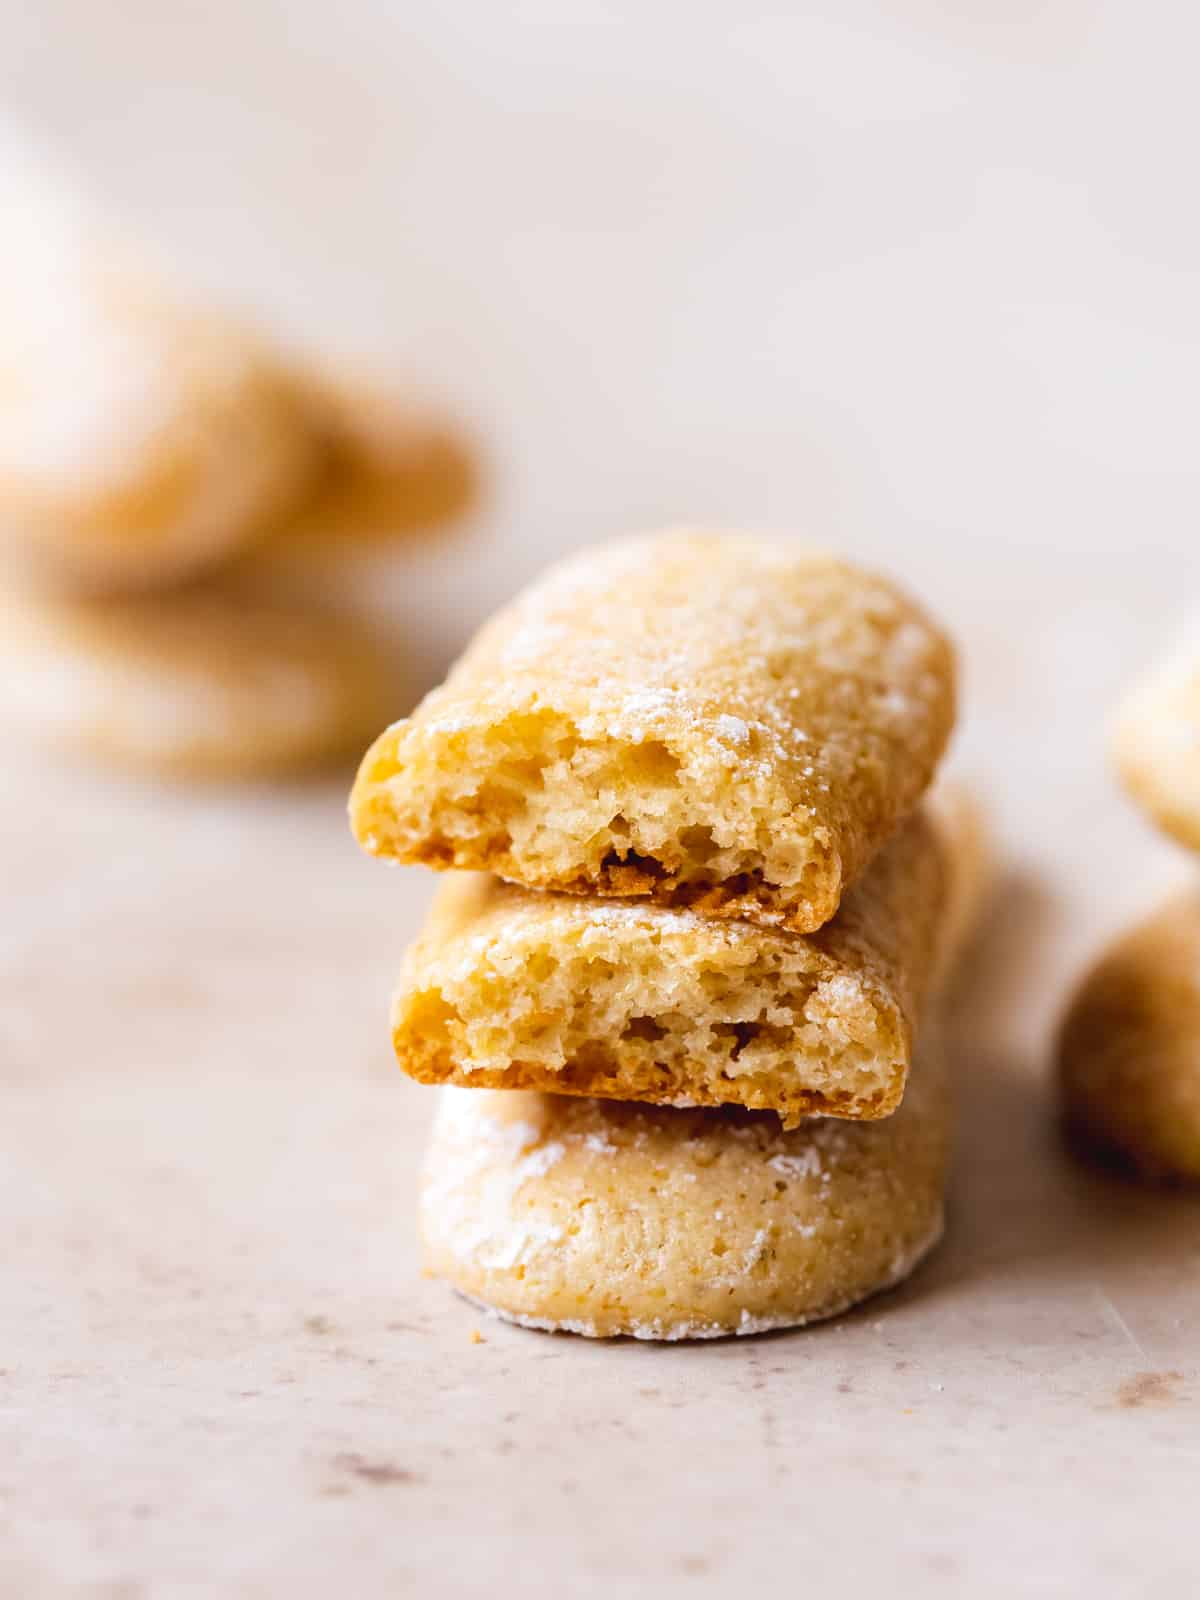 three ladyfinger cookies stacked on top of each other, with one sliced in half showing the cross-section and crunch consistency.